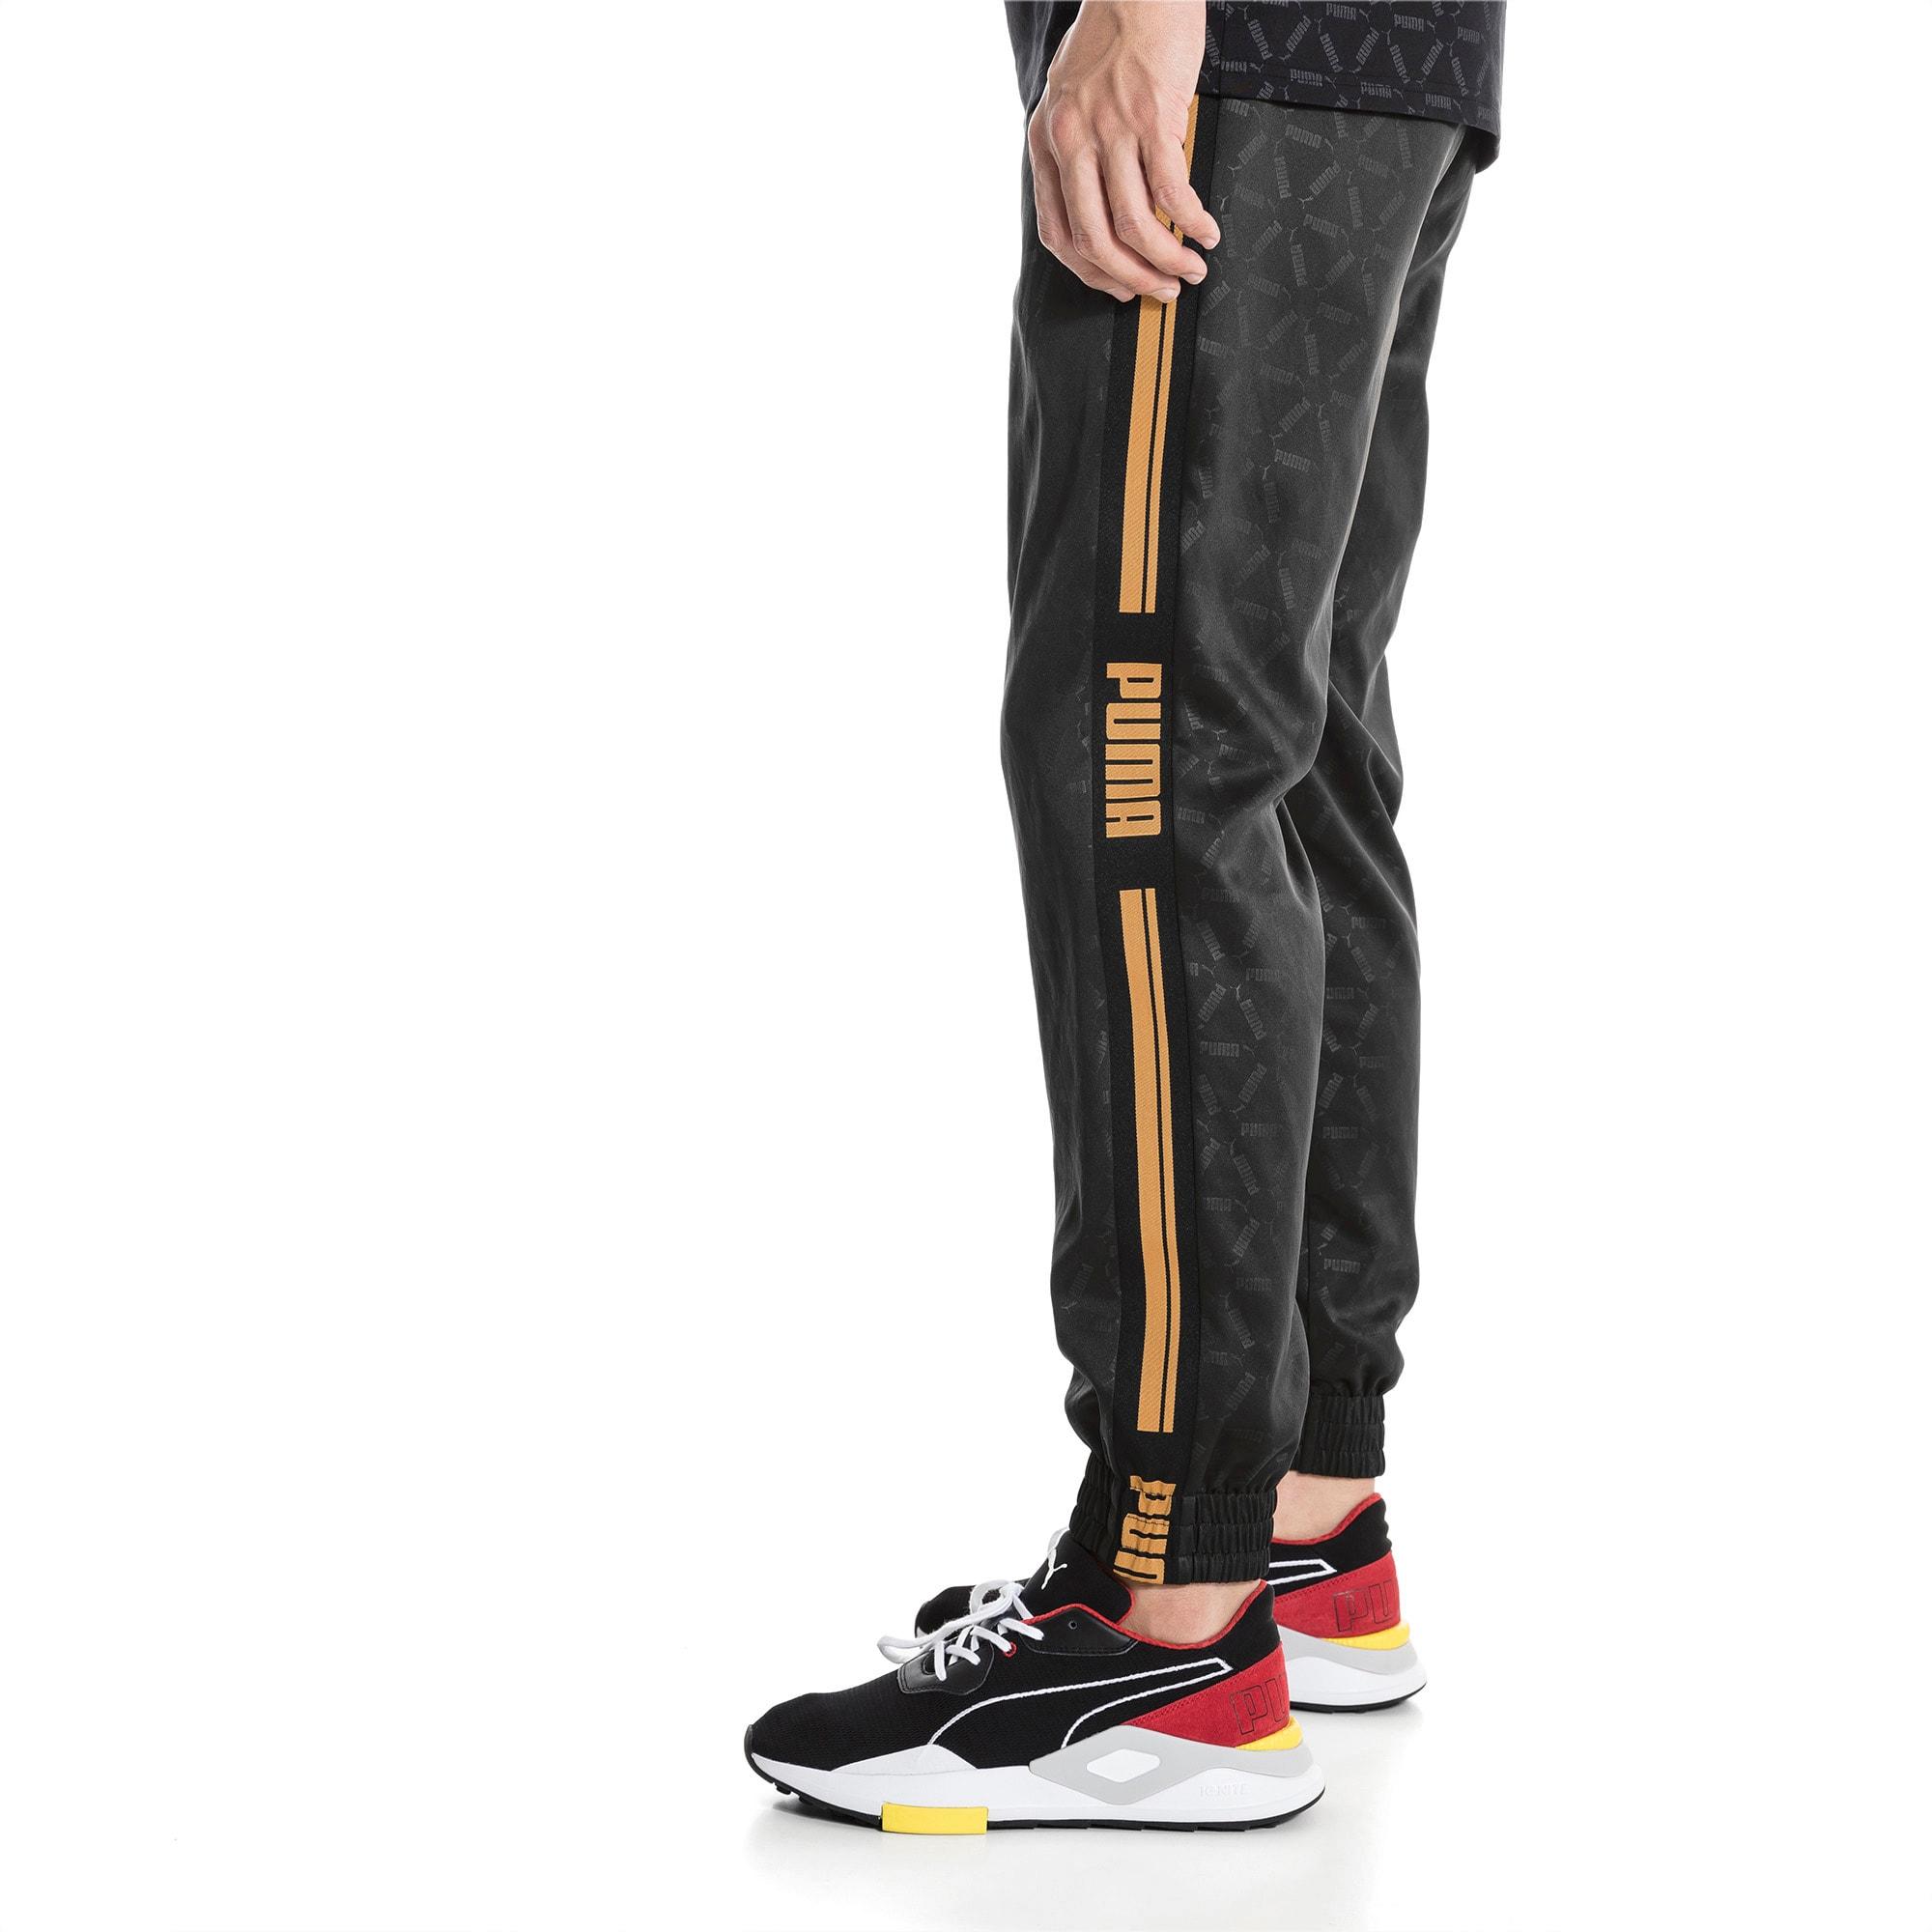 puma luxe pack track pants